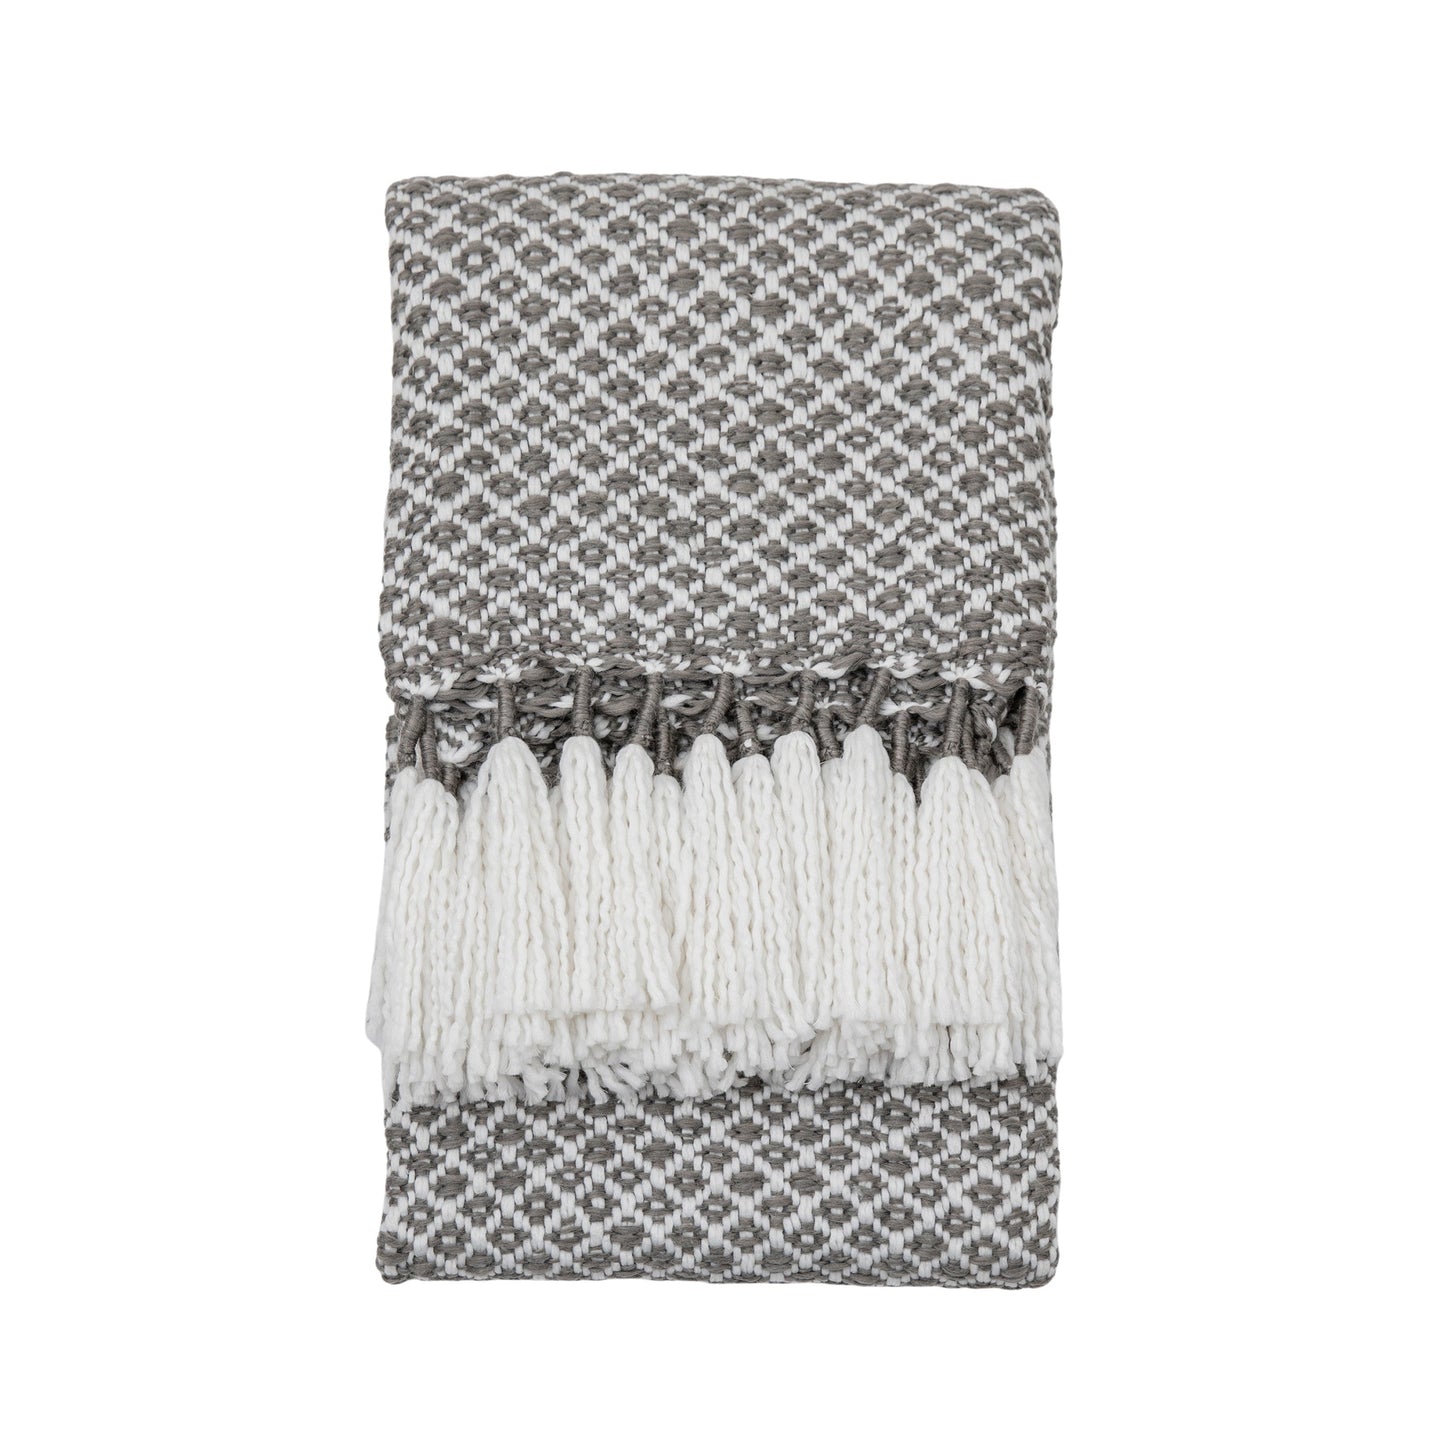 Woven Wrapped Tassel Throw Grey 1300x1700mm